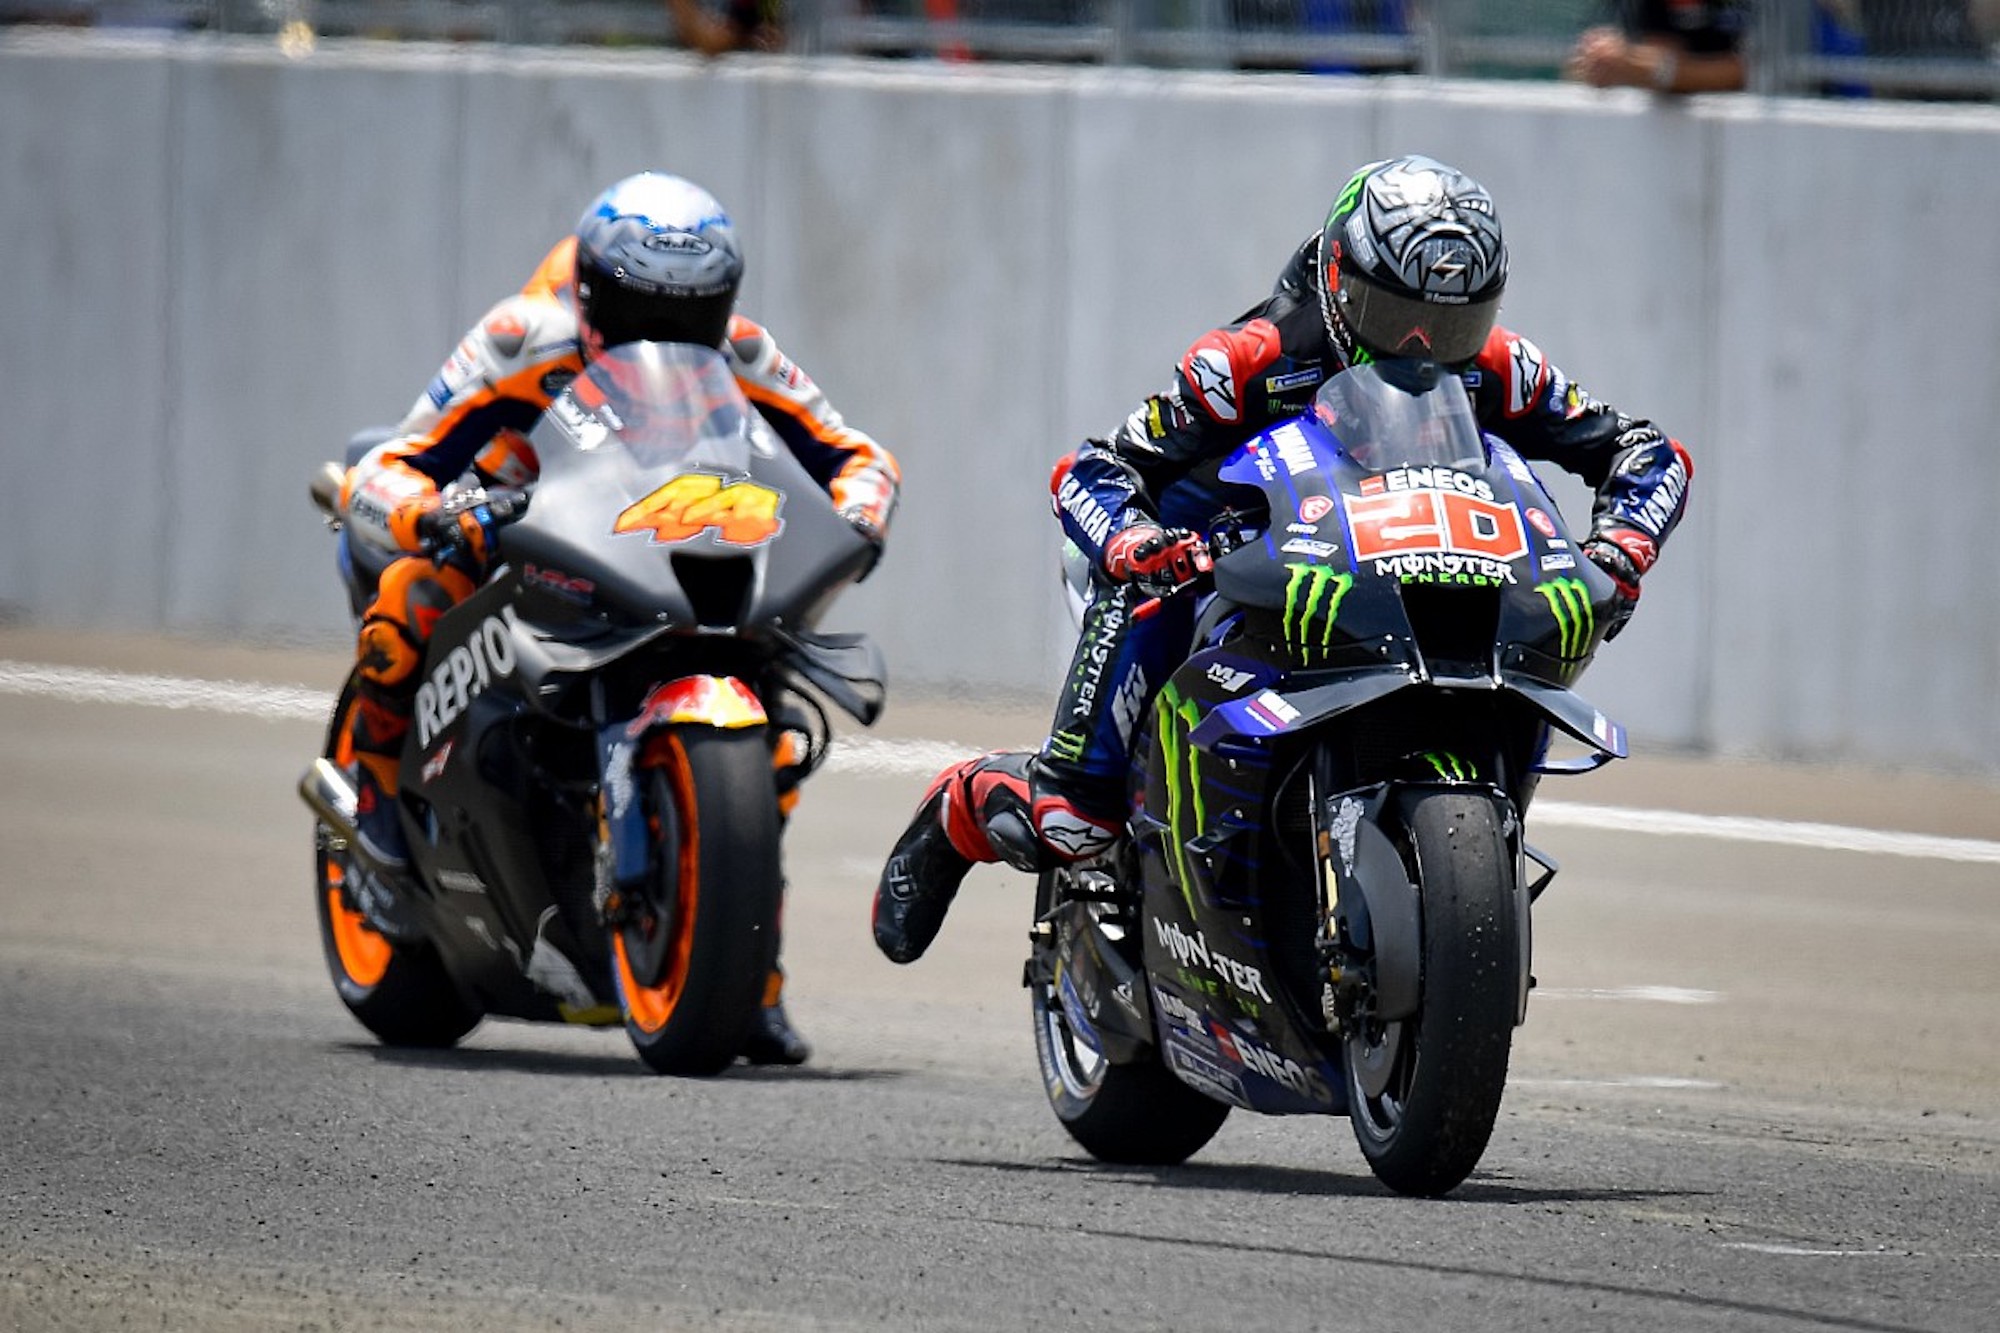 A pair of MotoGP racers getting ready to start their turn off the circuit. Media sourced from Autosport.